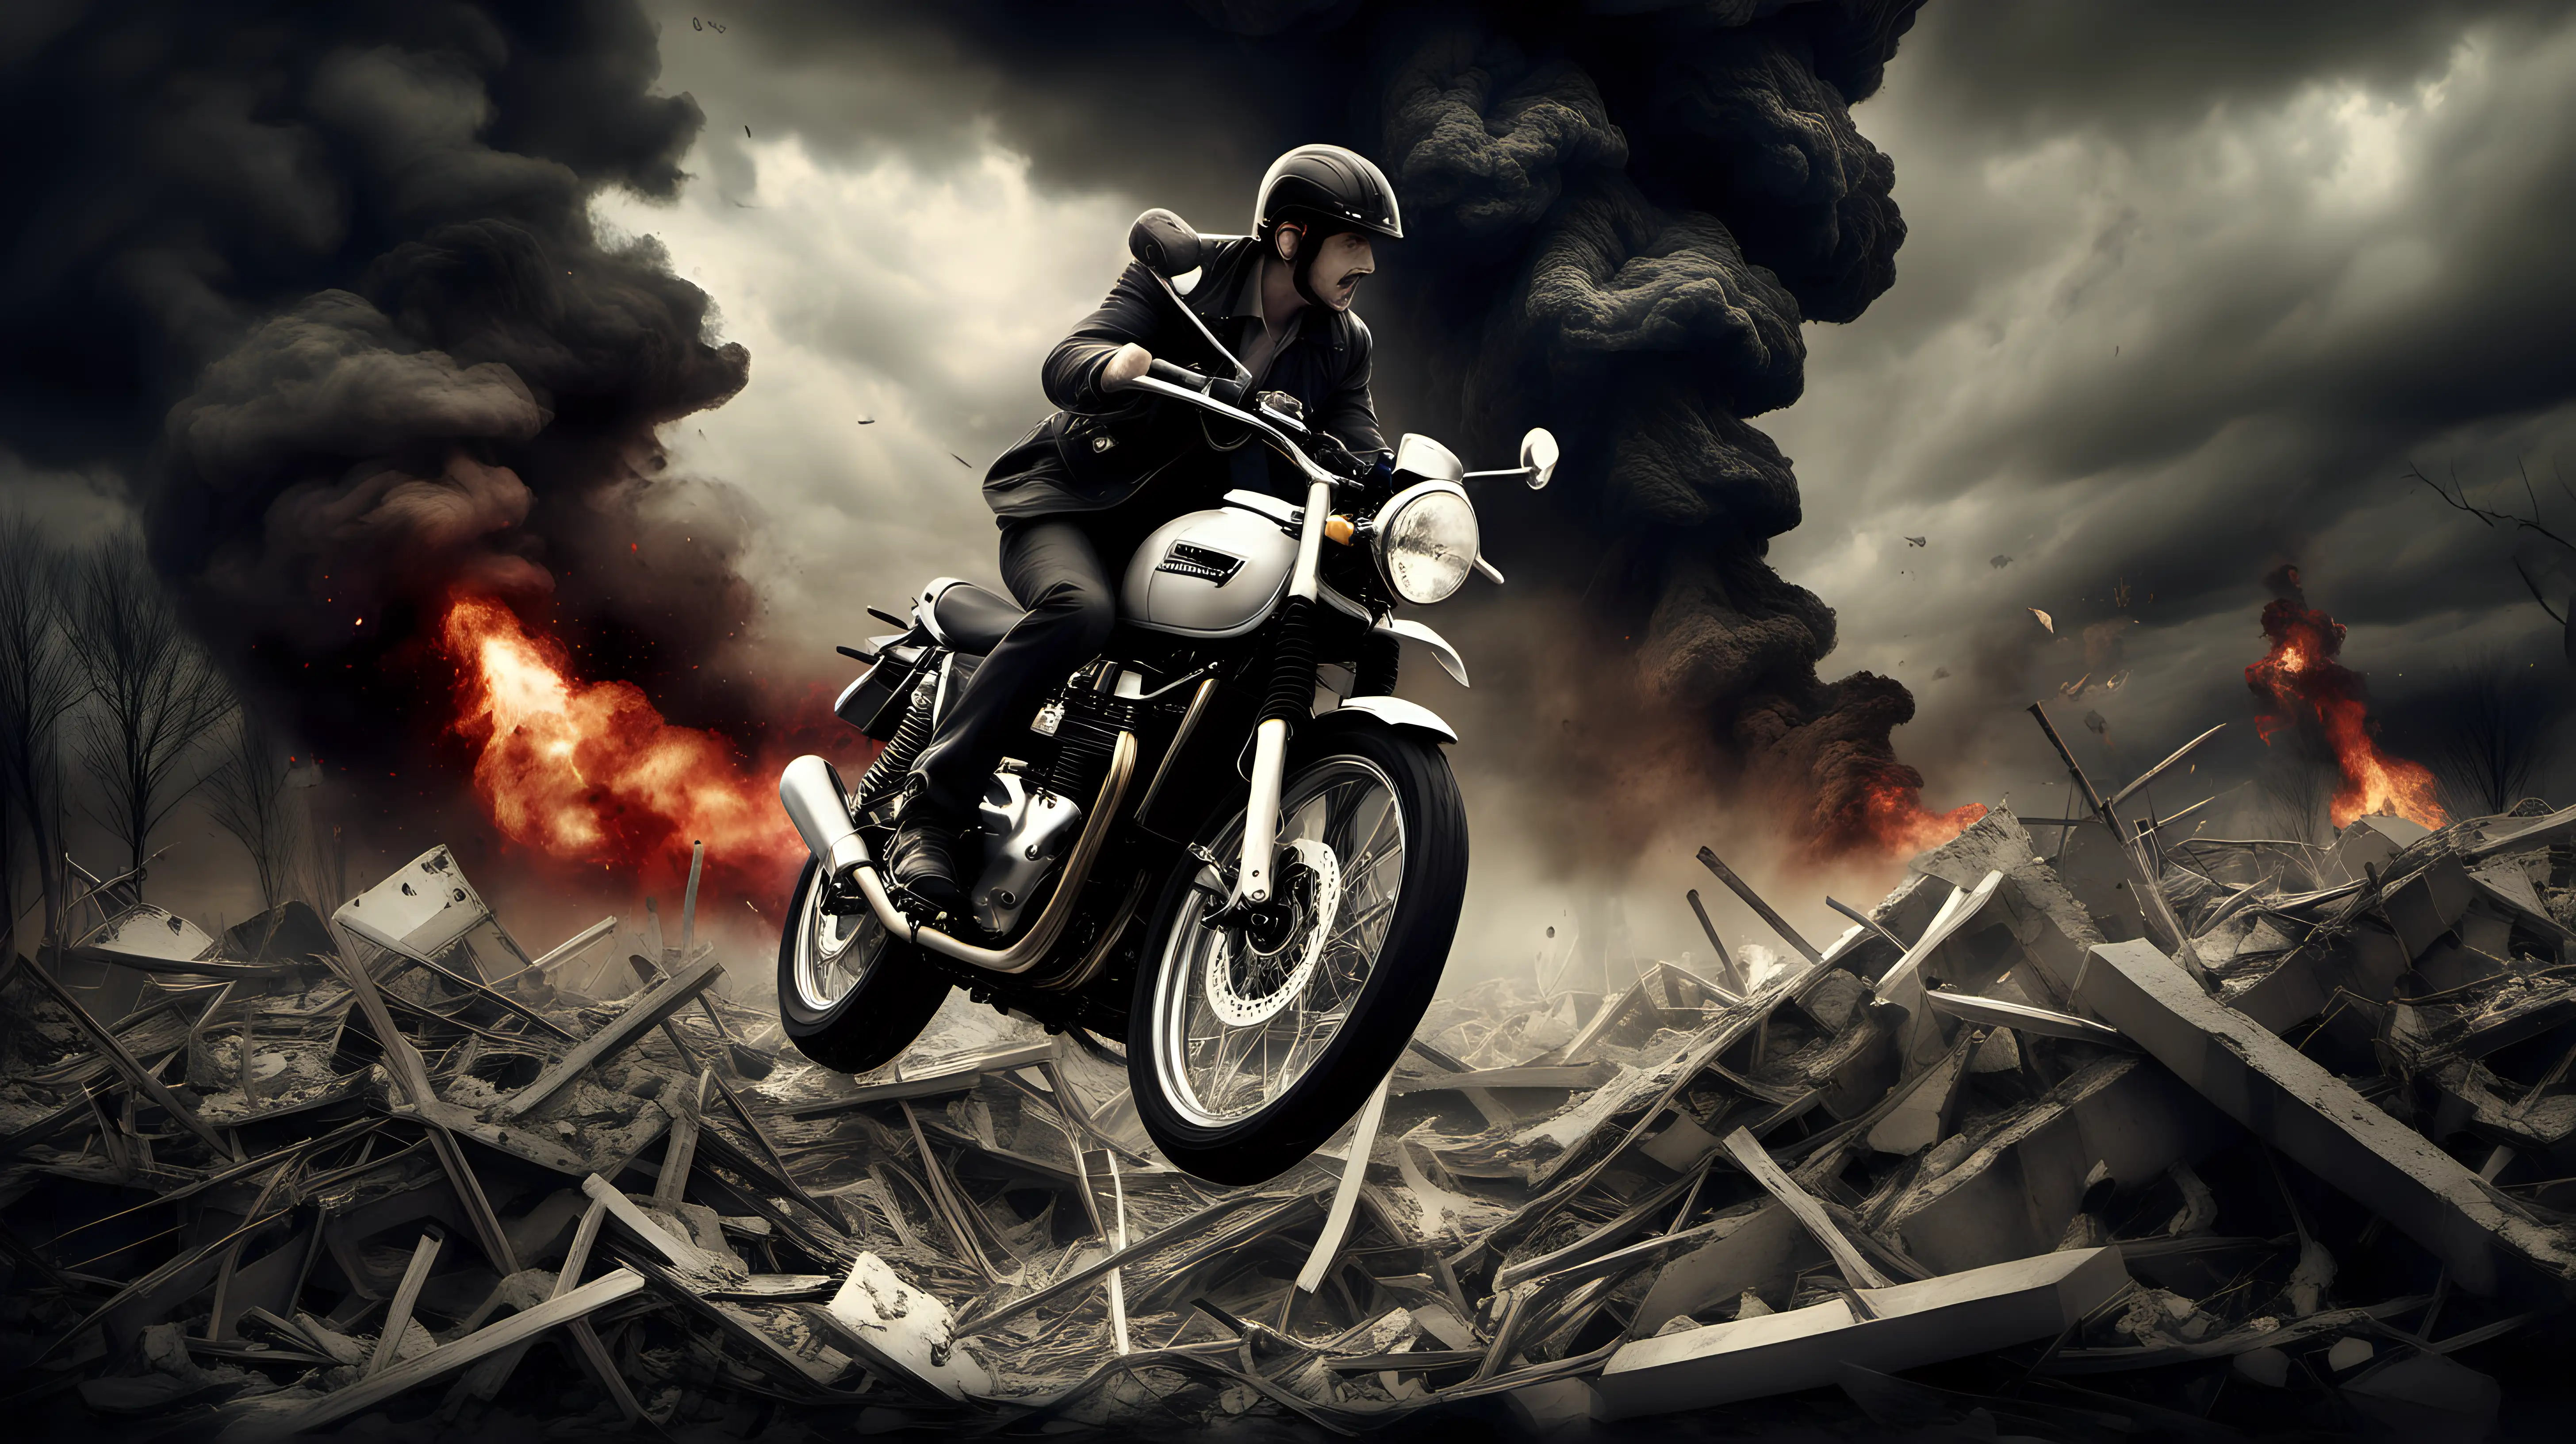 create a passionate, evocative image about a triumph and disaster